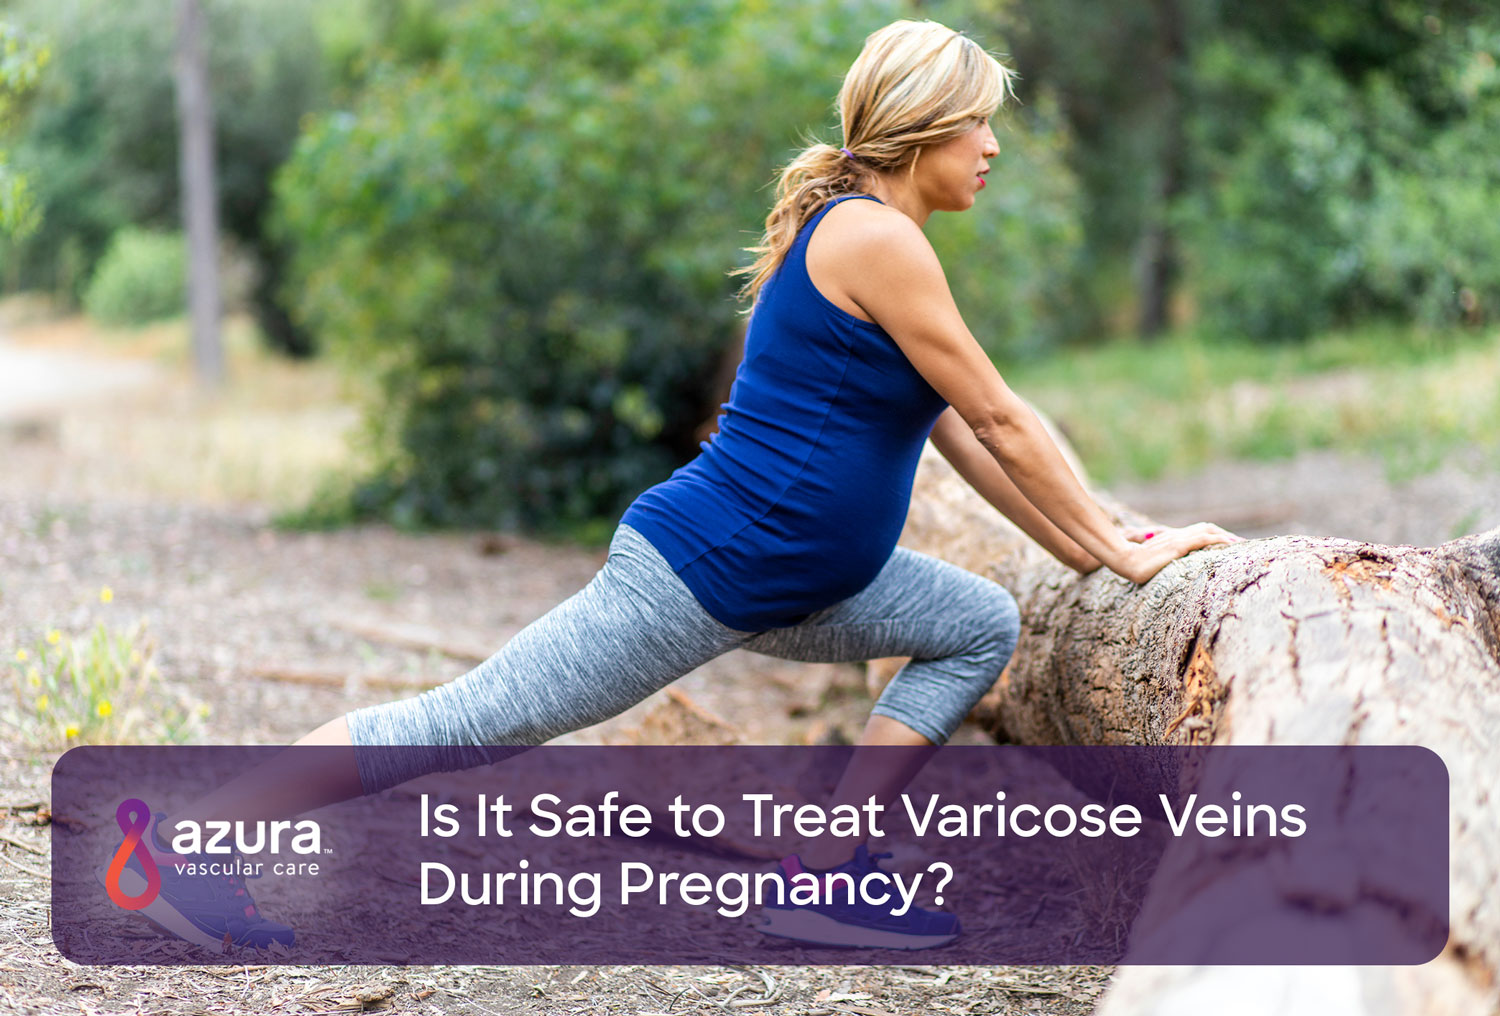 Treating Varicose Veins During Pregnancy